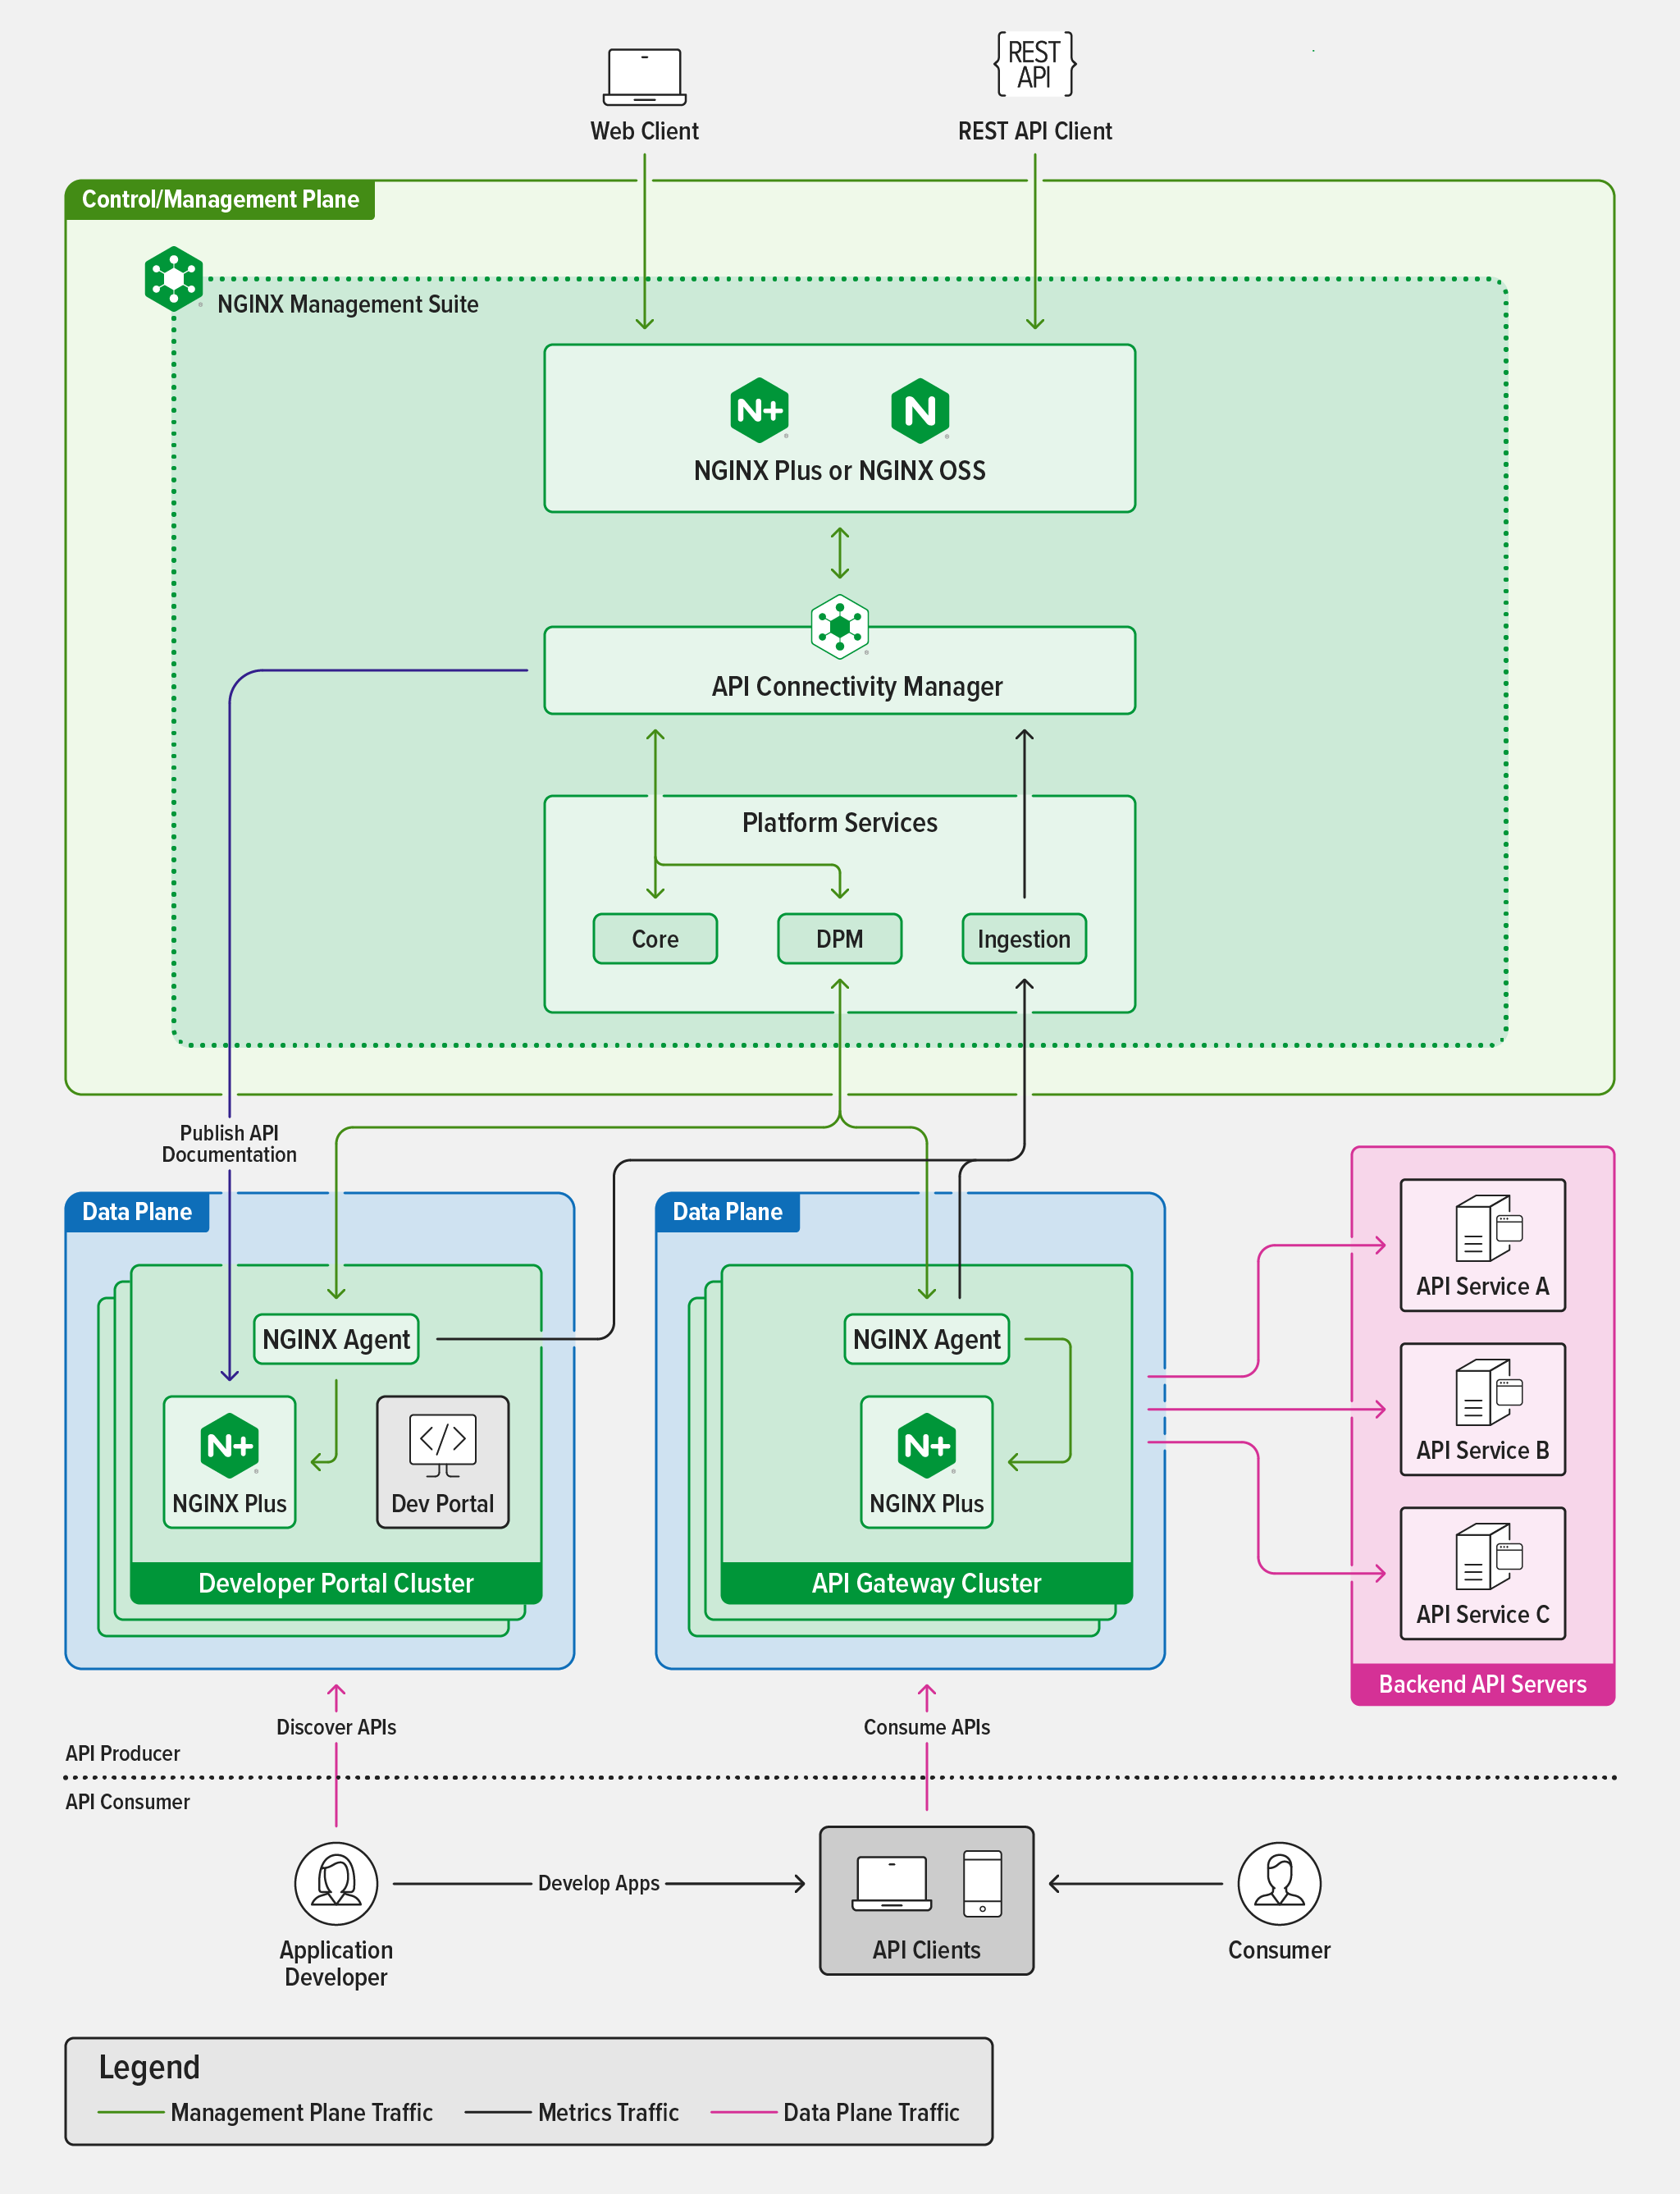 API Connectivity Manager architecture